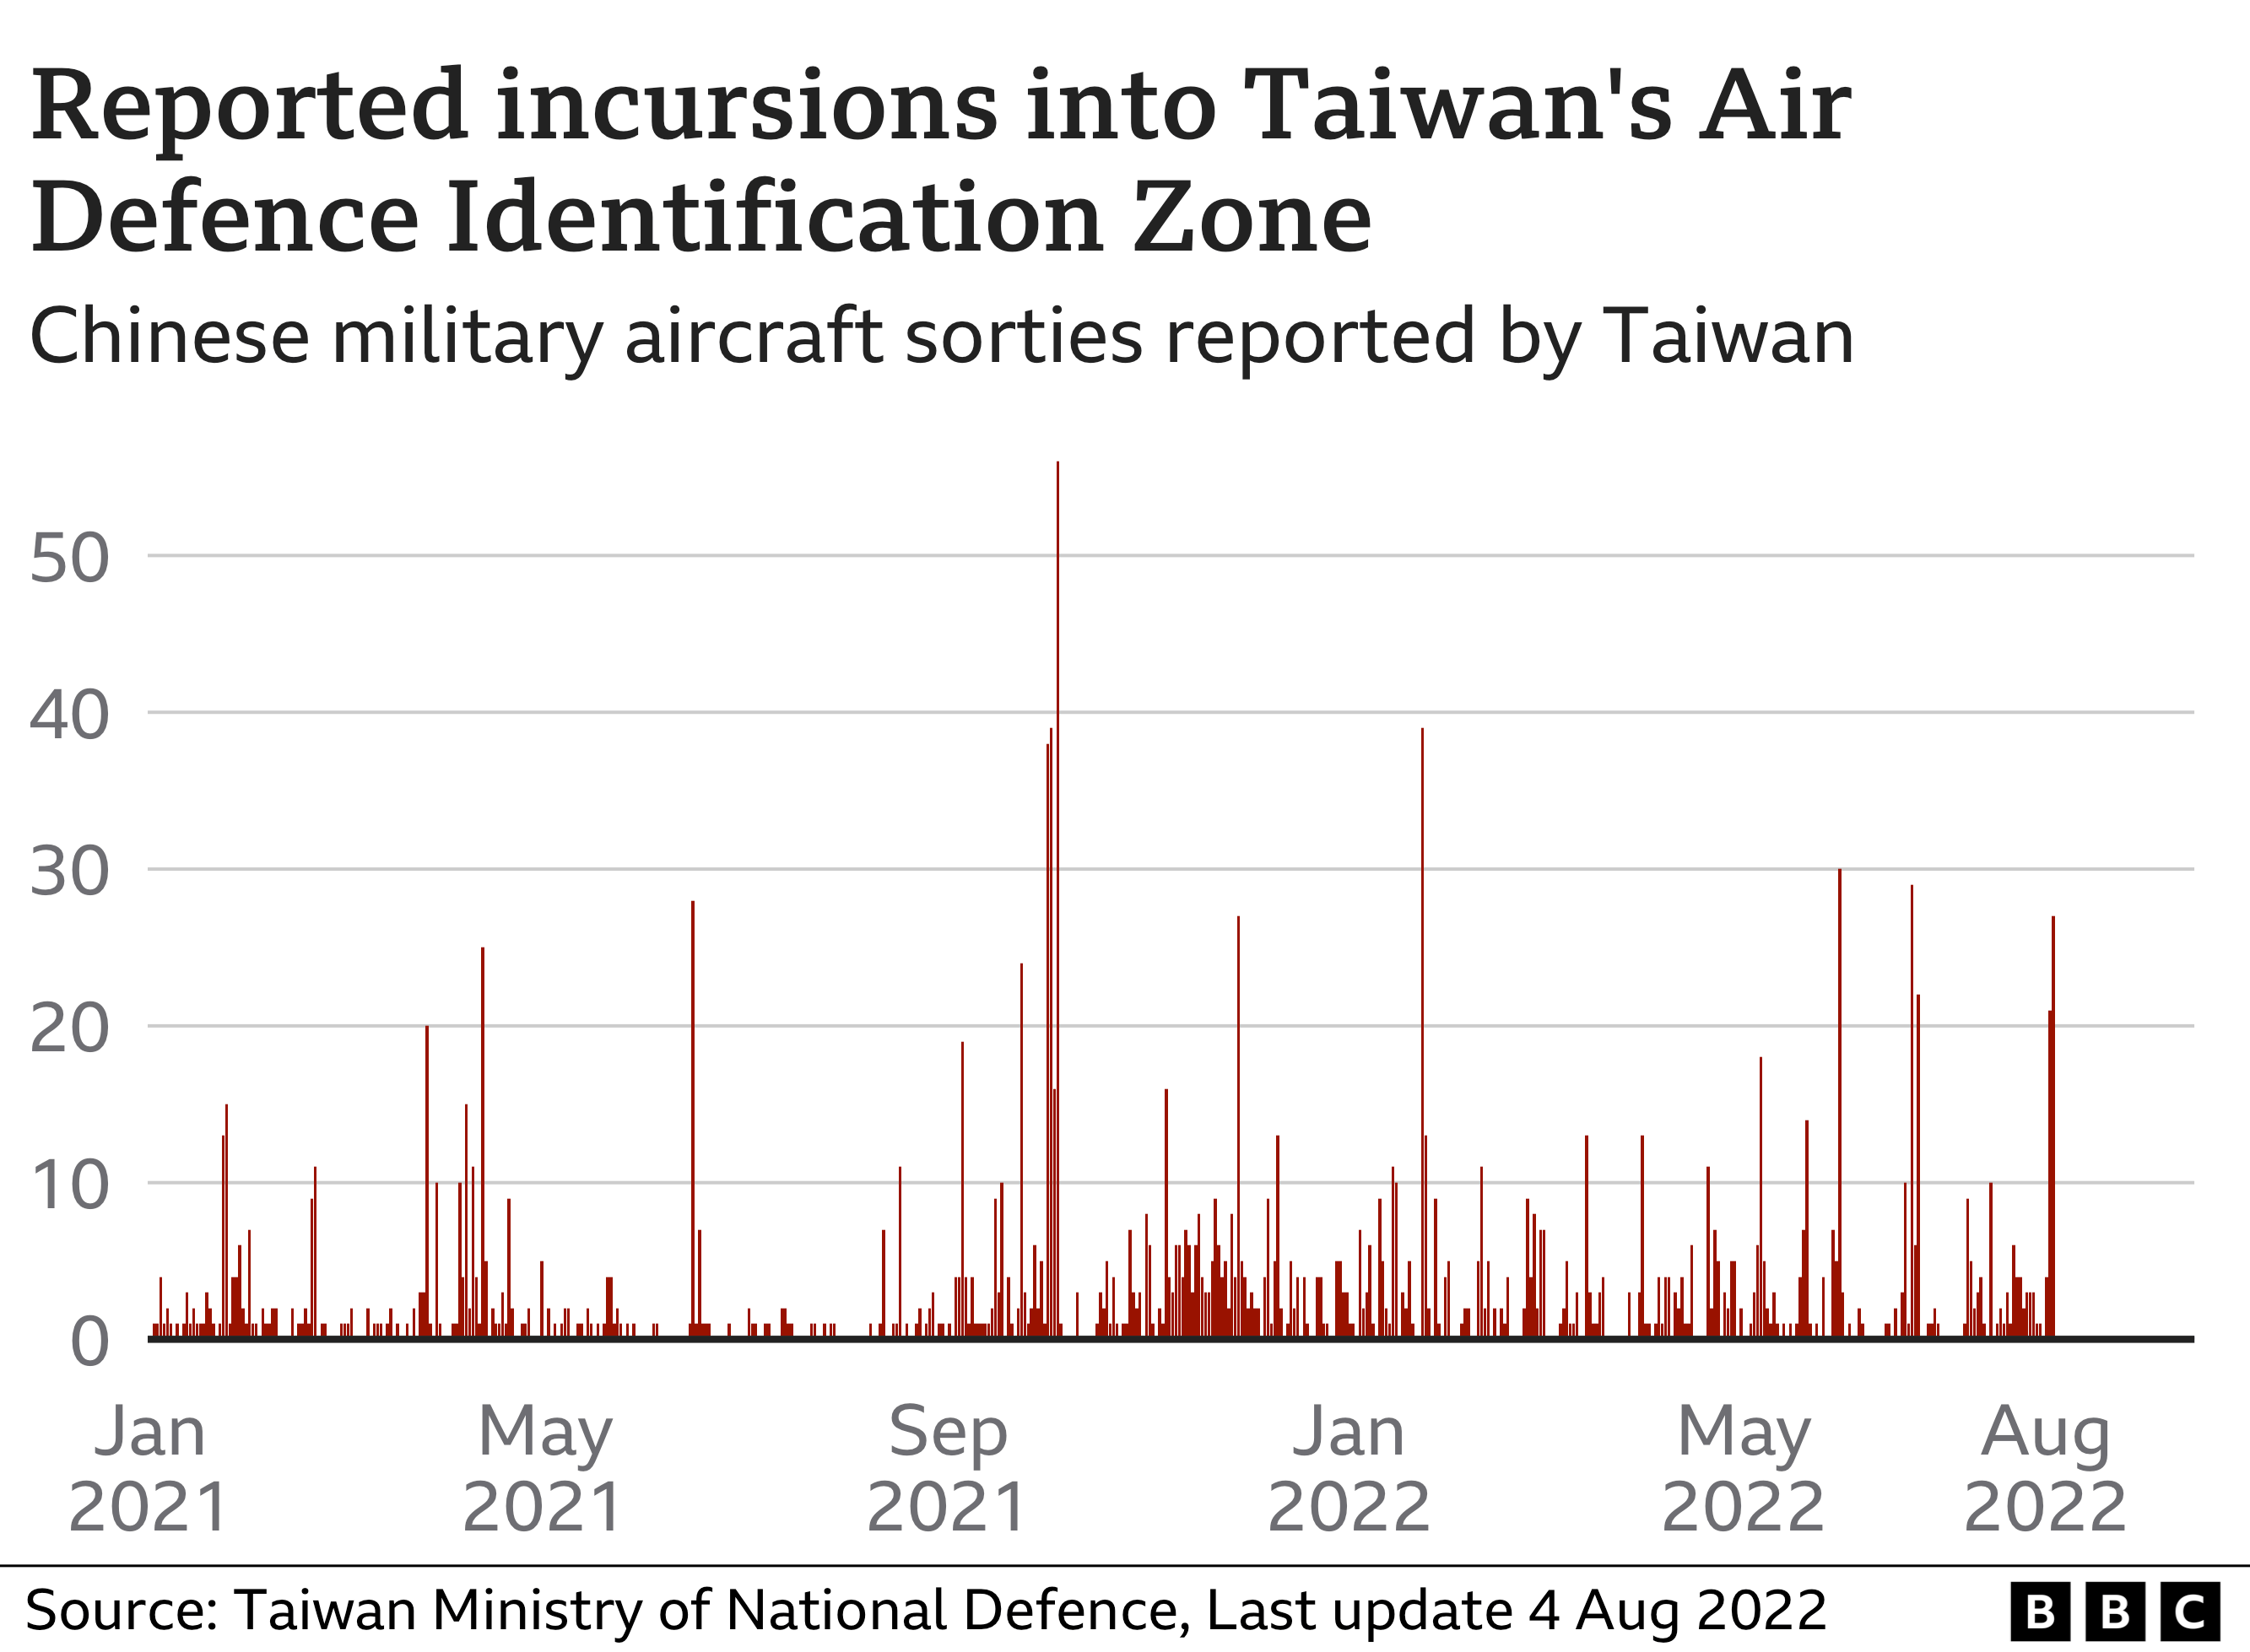 Graphic showing reported incursions into Taiwan's Air Defence Identification Zone. Updated 4 Aug 2022.